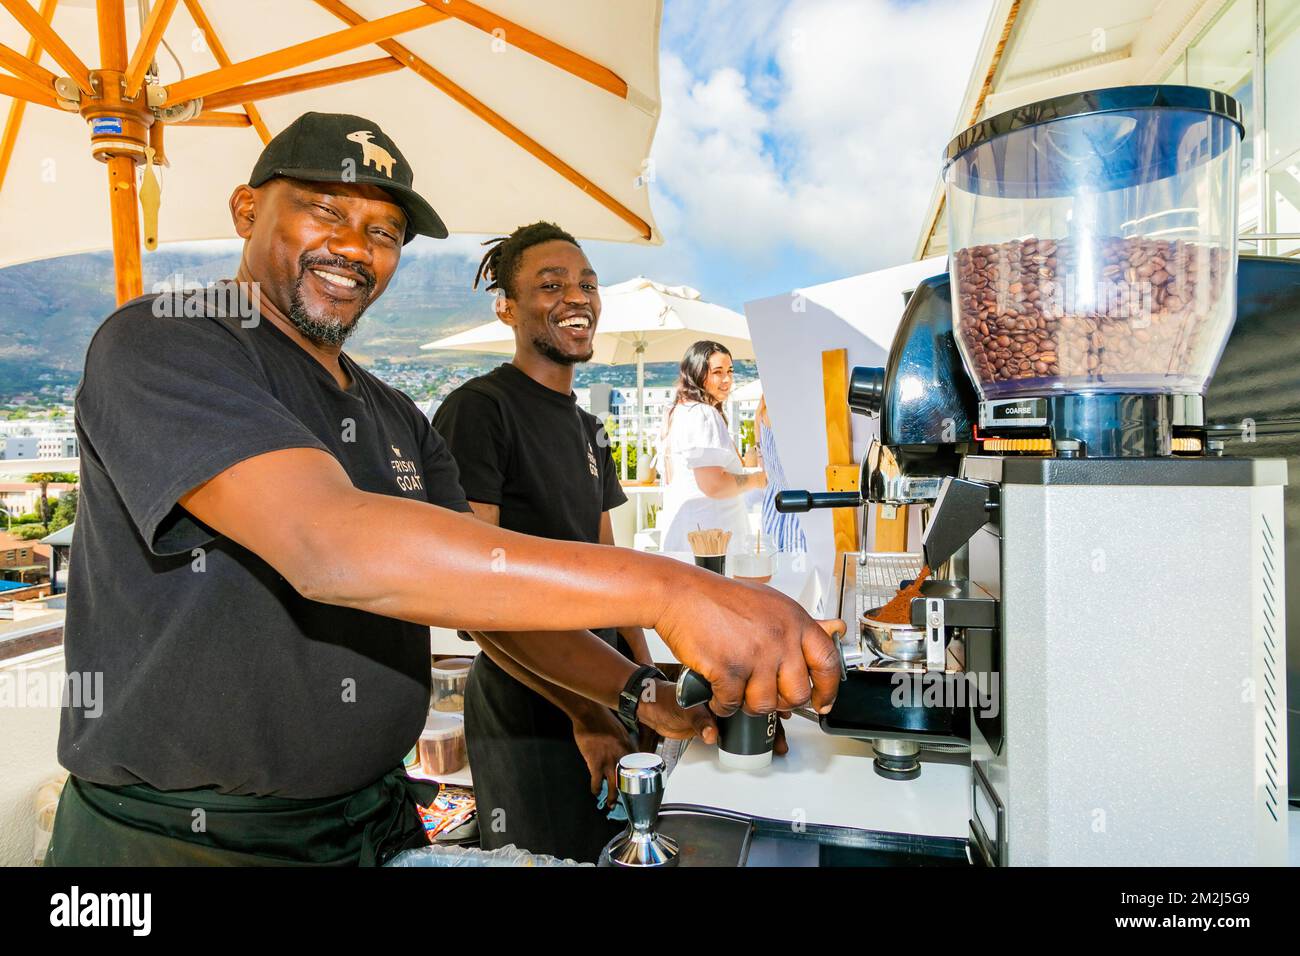 Cape Town, South Africa - November 15, 2022: African Male barista making a coffee at a cafe Stock Photo